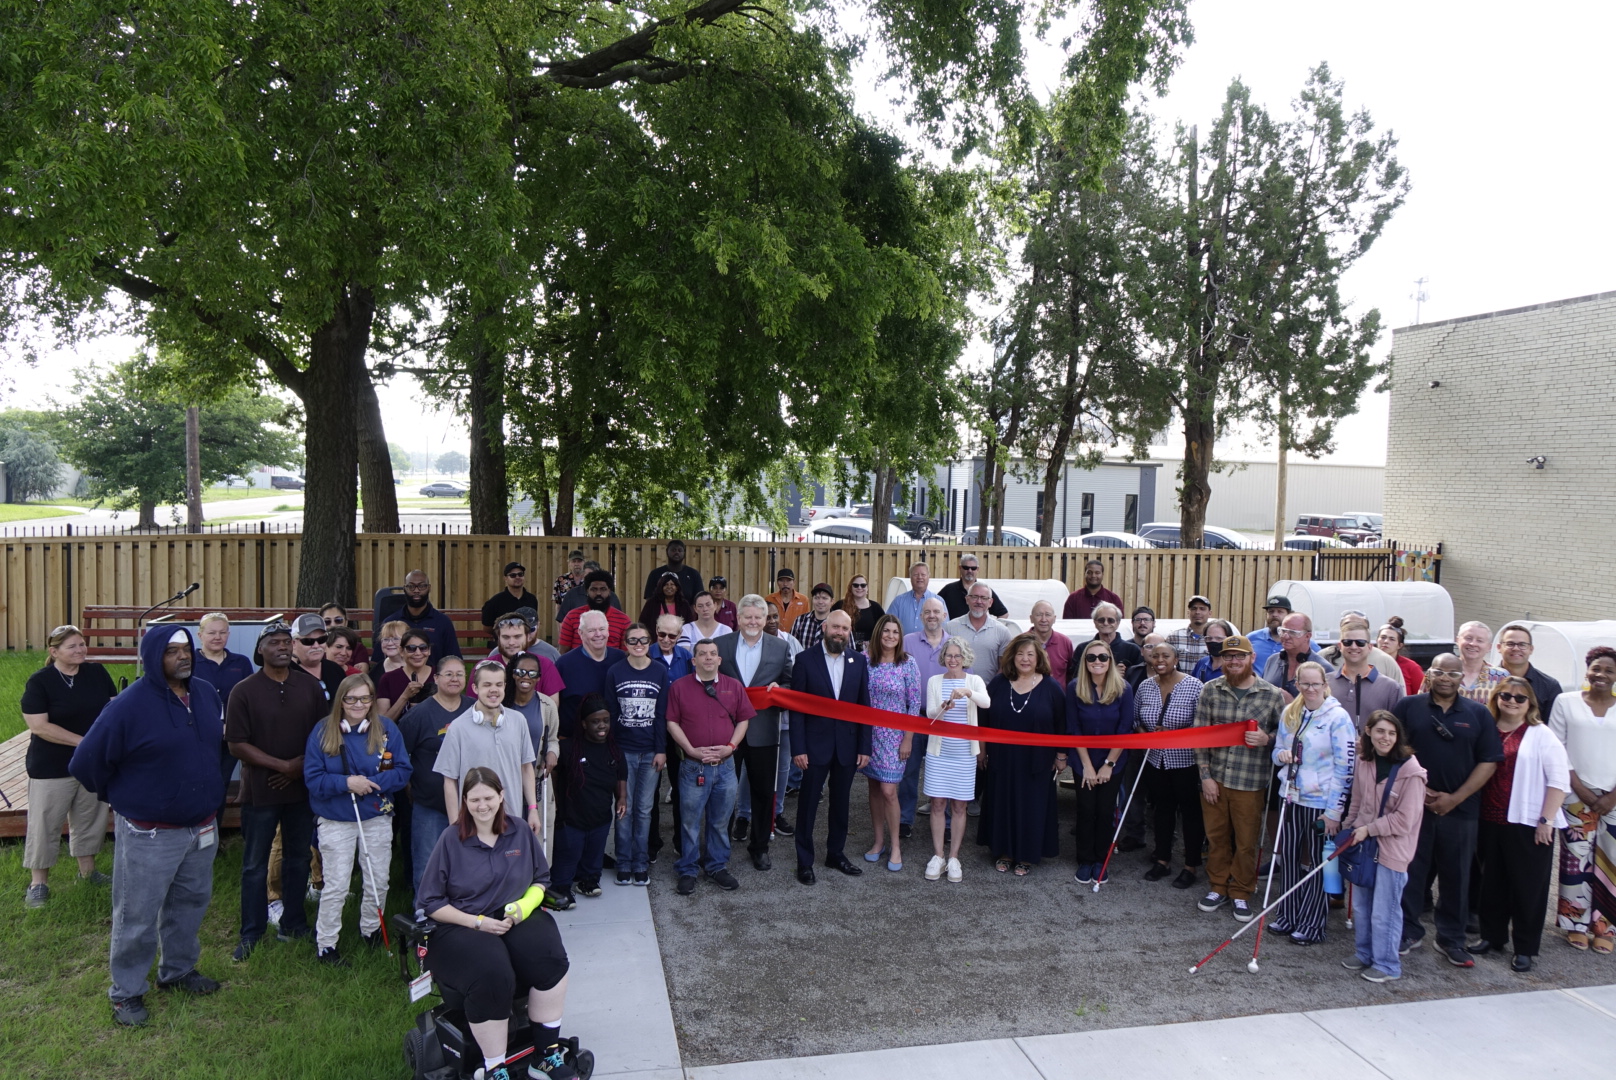 NewView's manufacturing employees gather together to celebrate the opening of the accessible garden and walking path